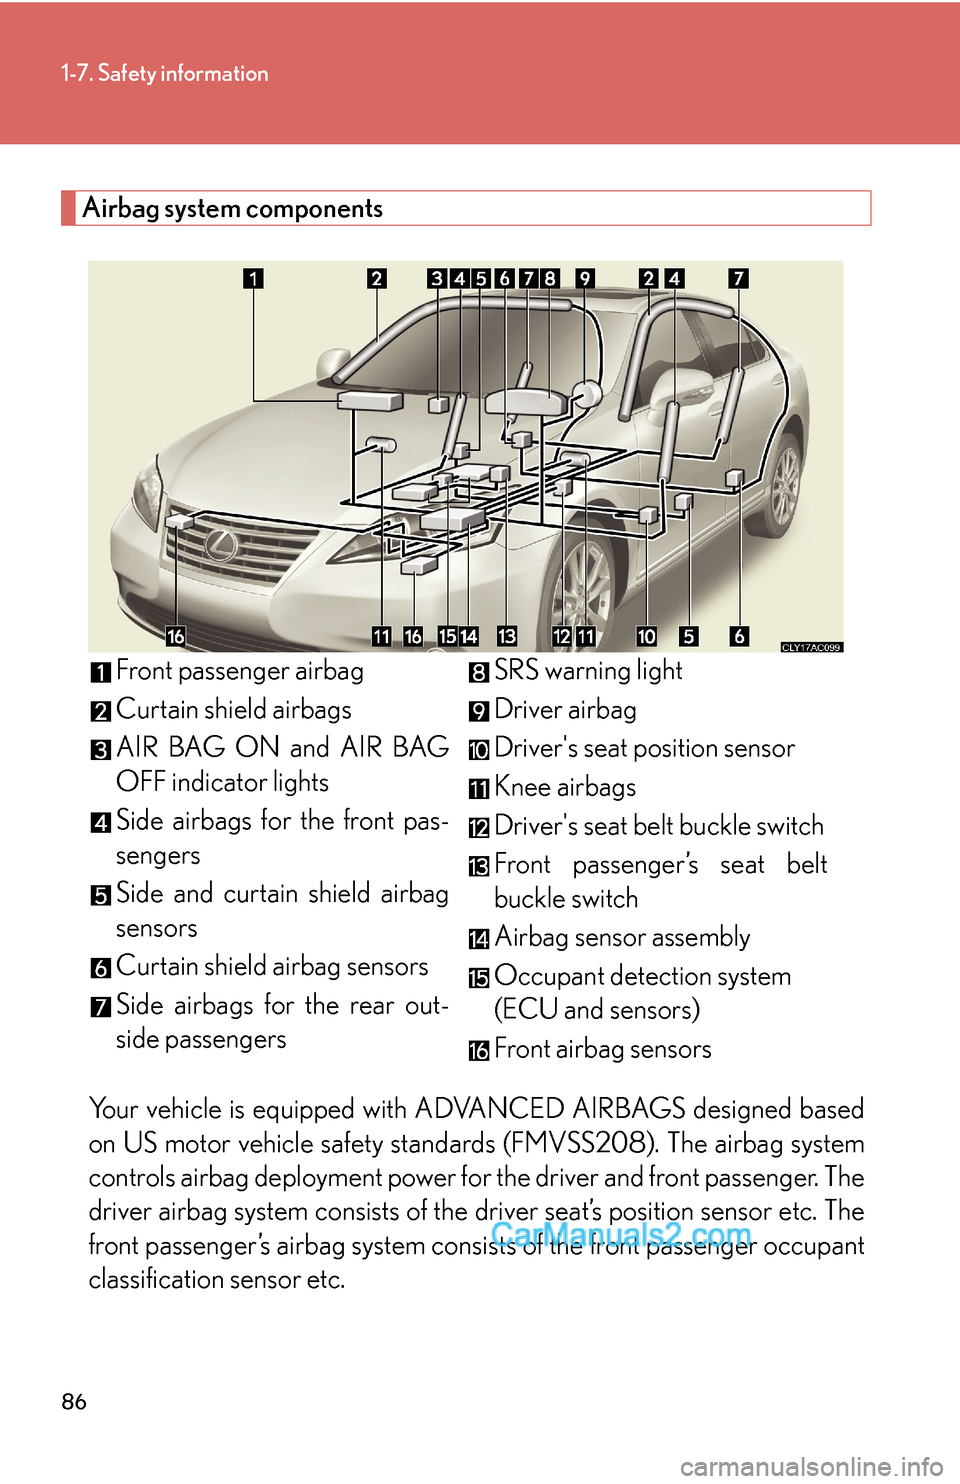 Lexus ES350 2010  Safety Information 86
1-7. Safety information
Airbag system components
Your vehicle is equipped with ADVANCED AIRBAGS designed based 
on US motor vehicle safety standards (FMVSS208). The airbag system 
controls airbag d